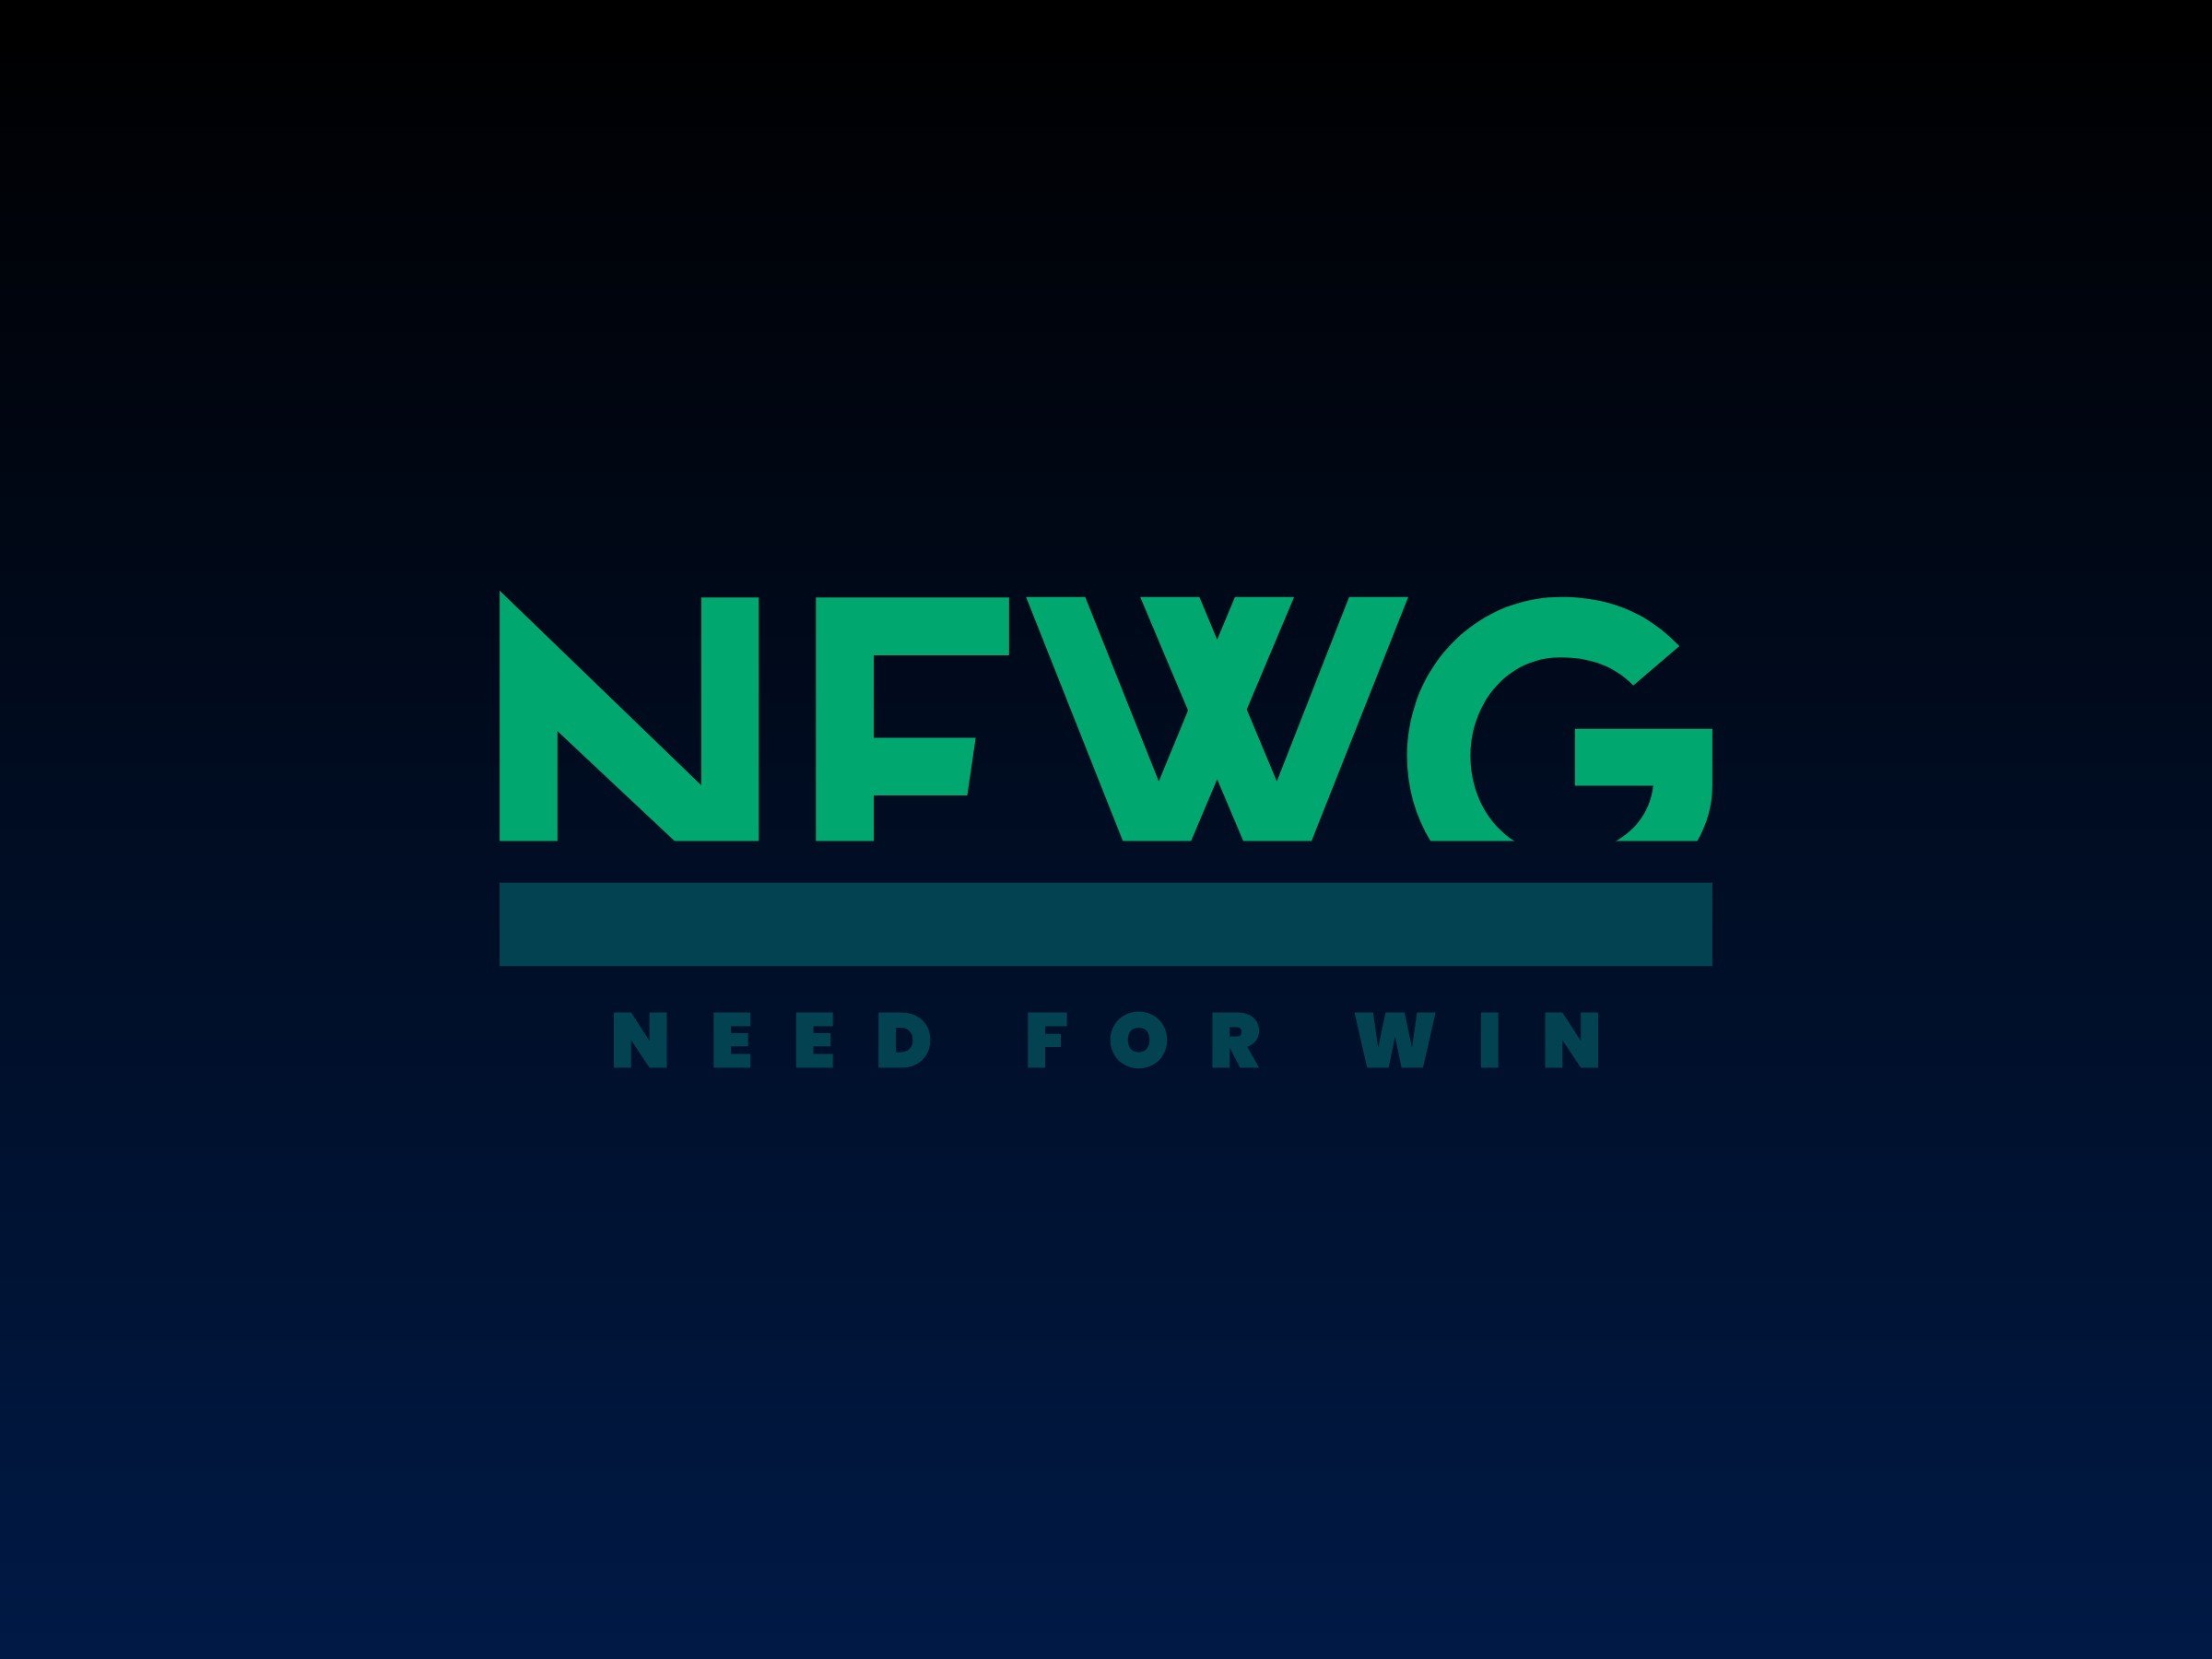 NFWG - Need For Win